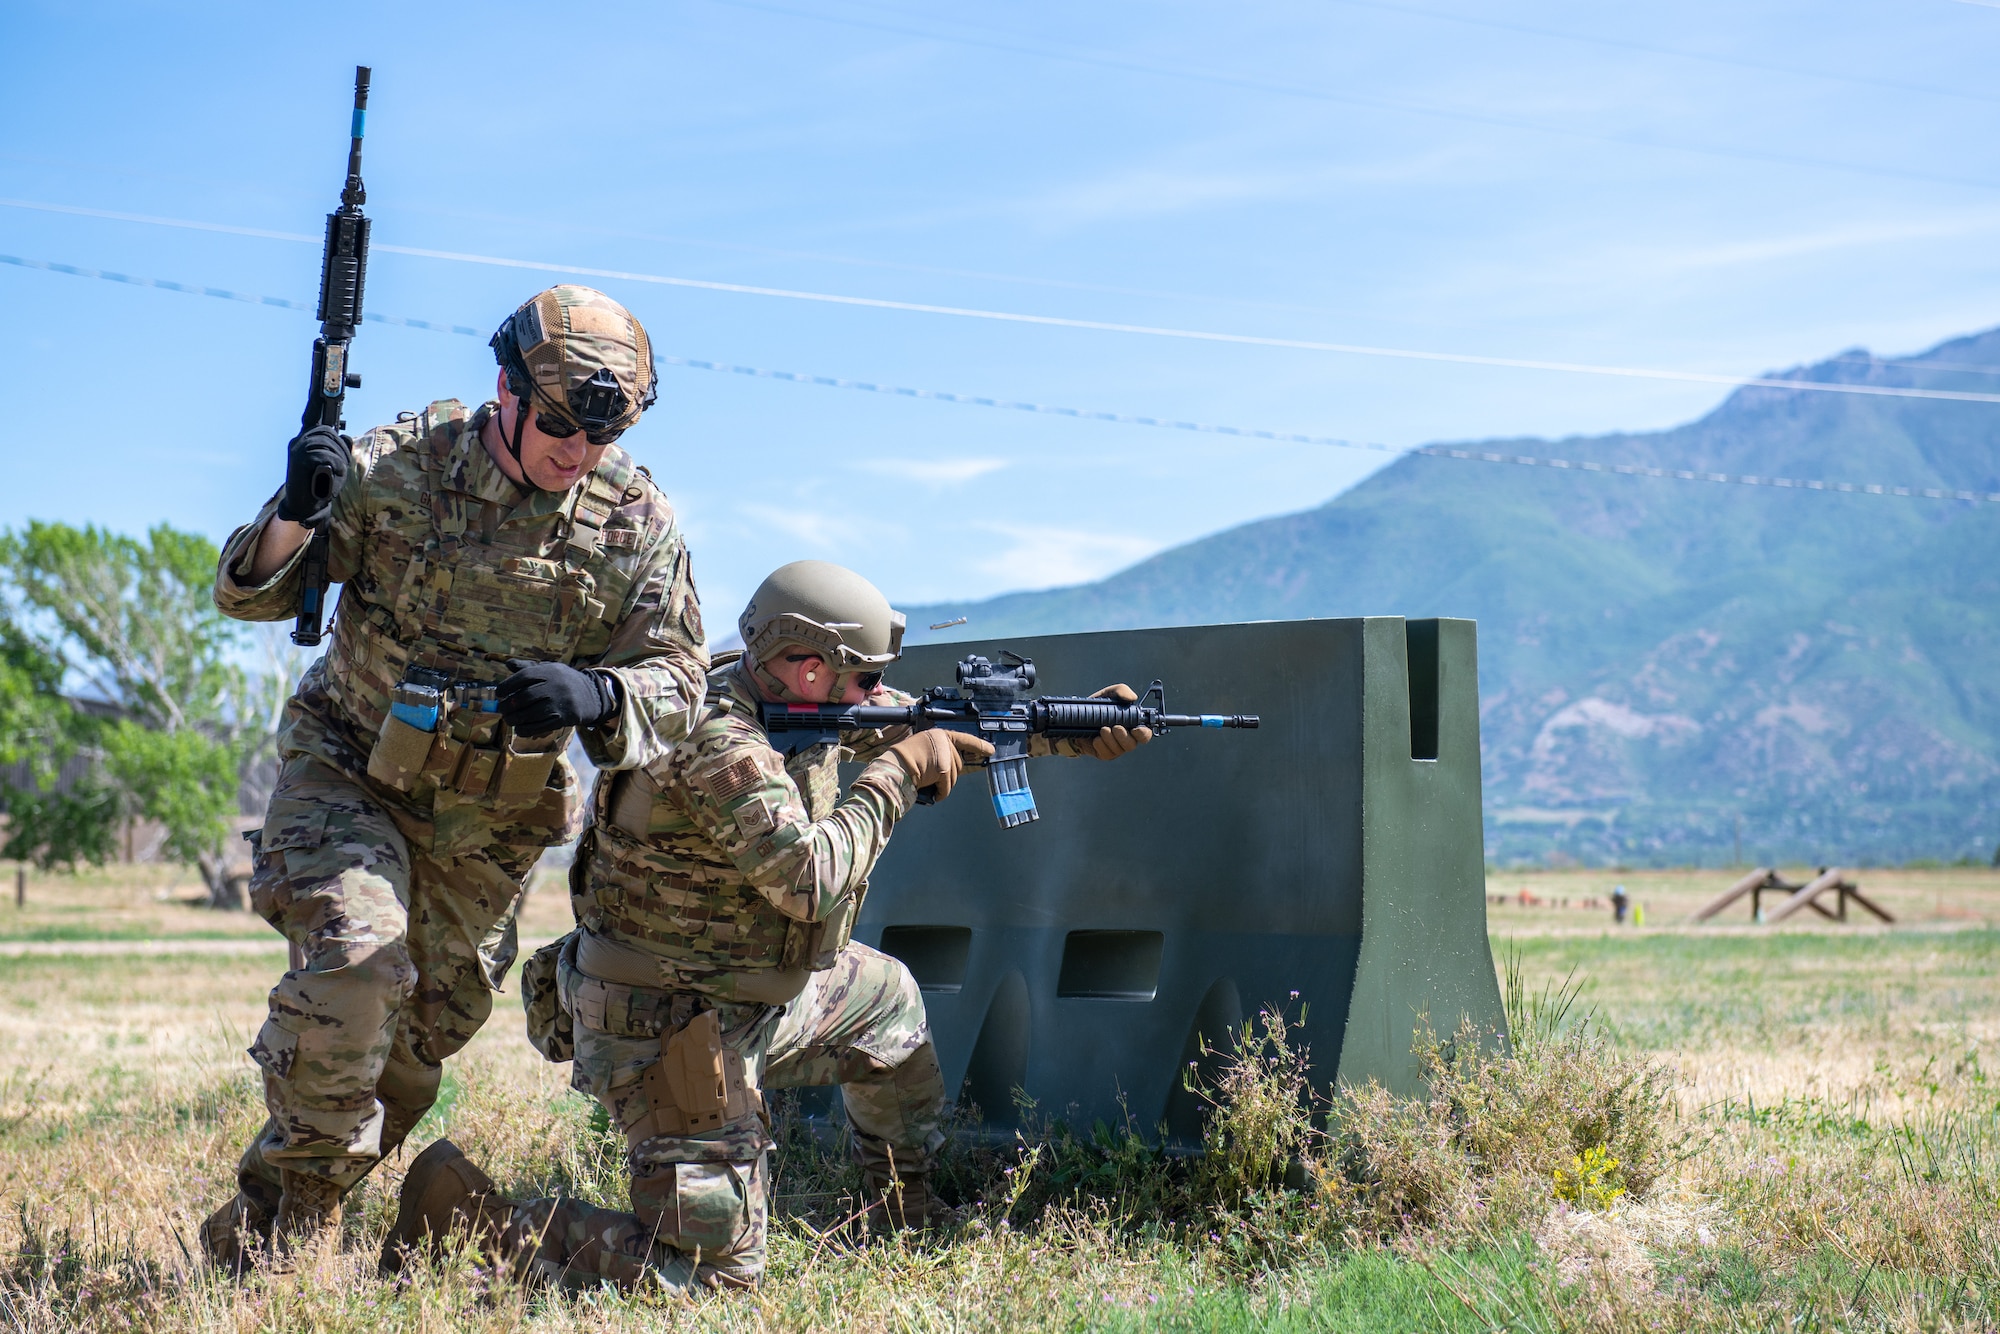 Staff Sgt. Kallen Cox, 419th Security Forces combat arms instructor, provides cover for Tech. Sgt. Nicholas Gribble during their “Shoot, Move, Communicate” exercise at Hill Air Force Base, Utah on June 11, 2022. The exercise is part of their annual weapons training plan, ensuring Airmen remain proficient in not only marksmanship, but how to move and communicate effectively when engaged with a target. (U.S. Air Force photo by Senior Airman Erica Webster)